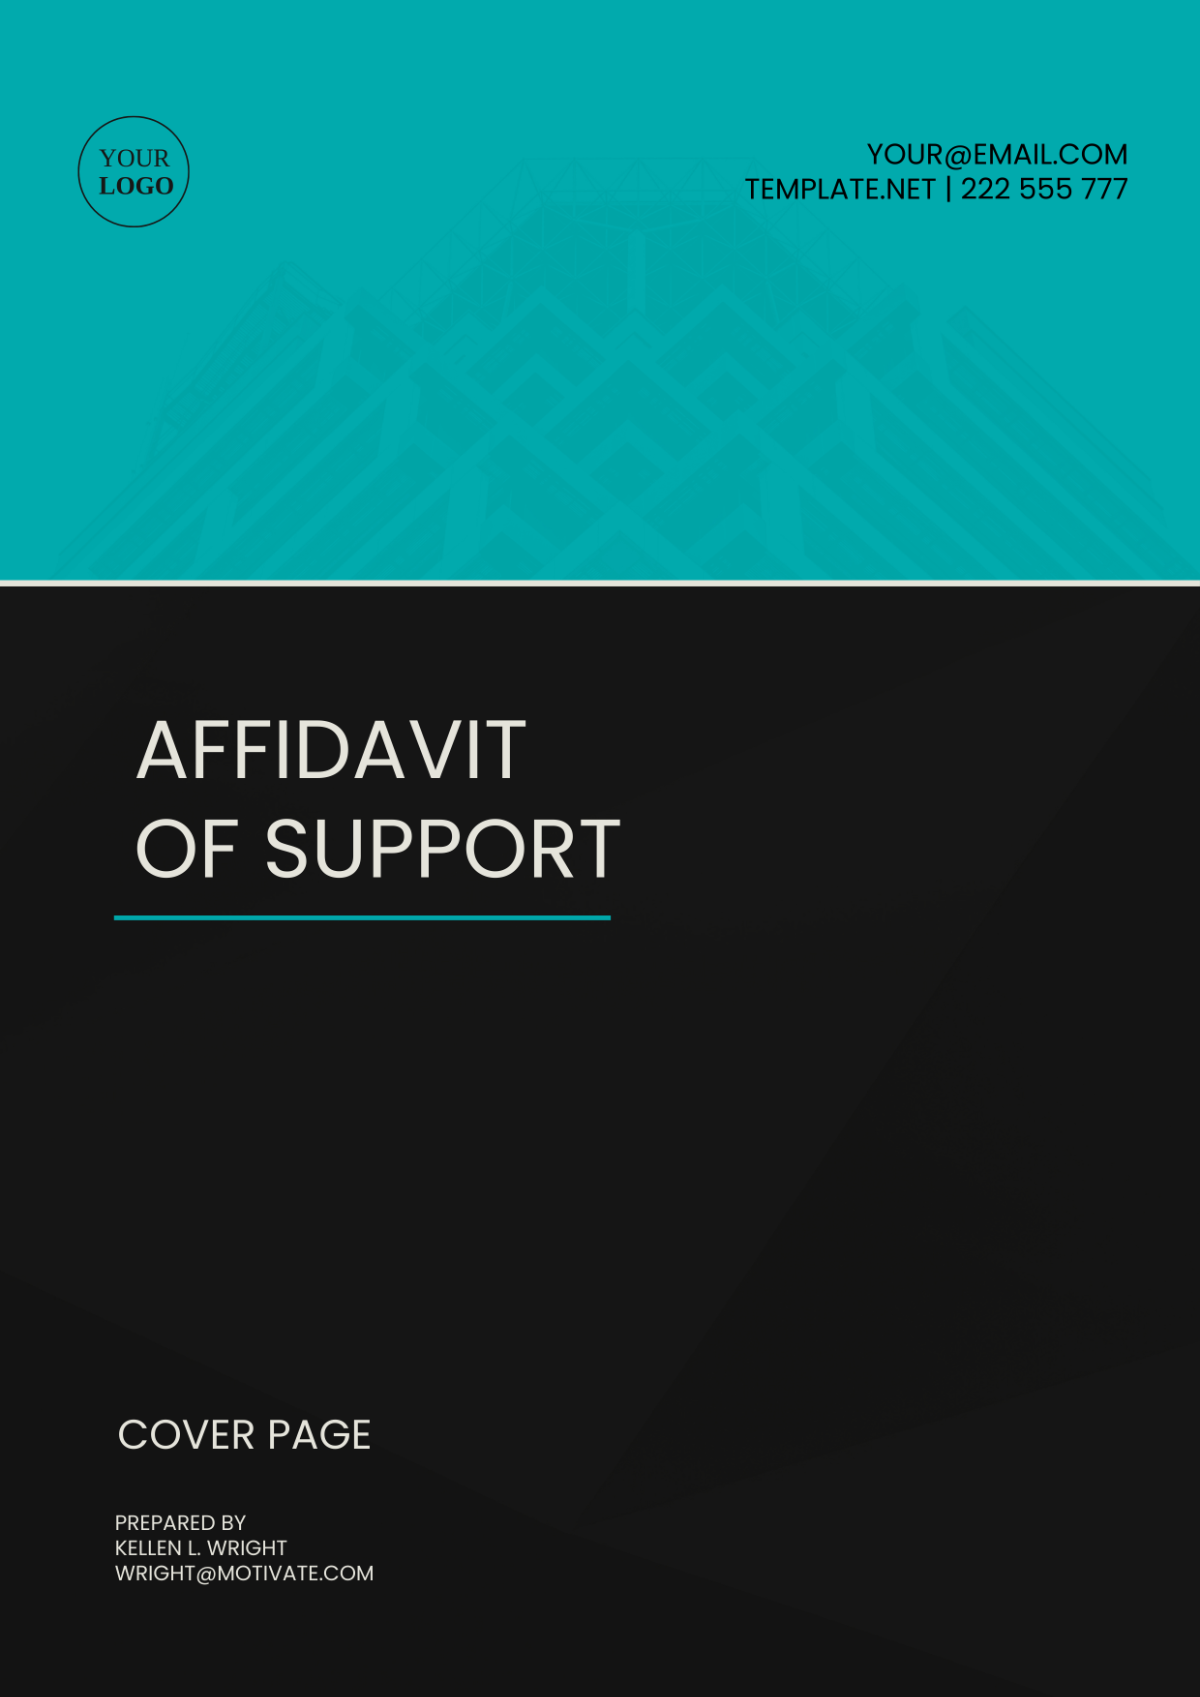 Affidavit of Support Cover Page Template